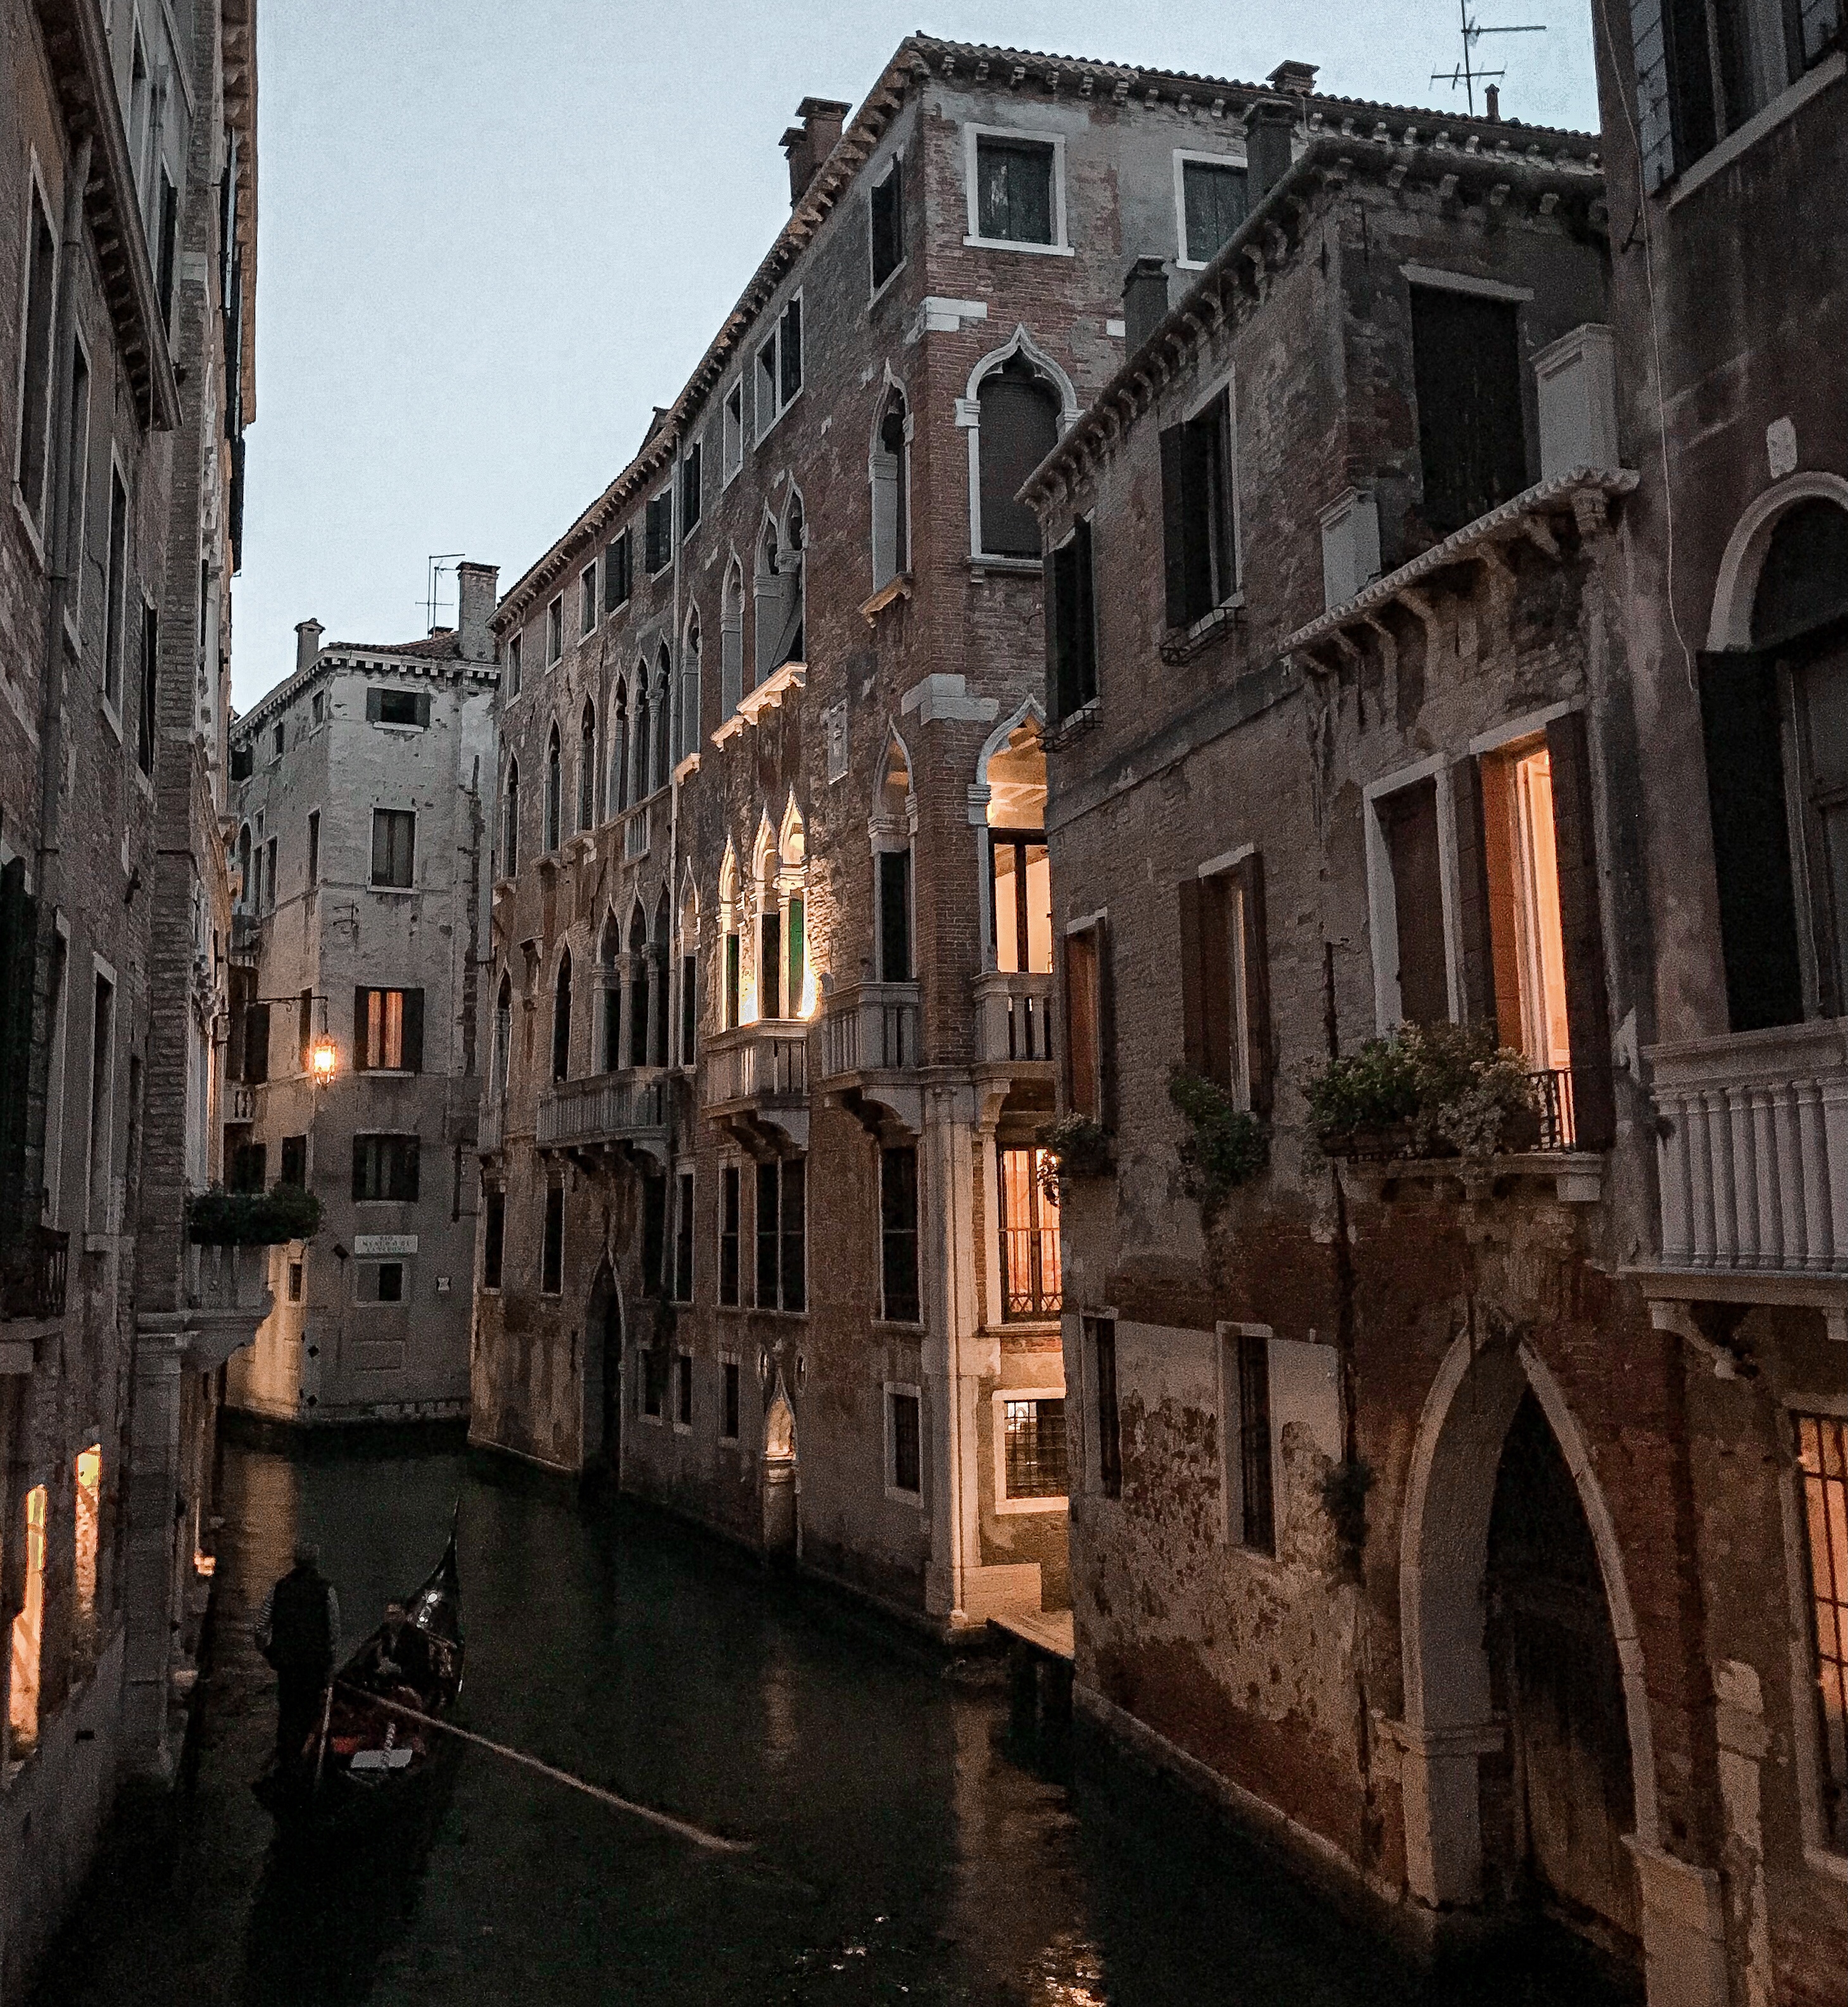 Picturesque neighbourhood in Venice with astonishing architecture.